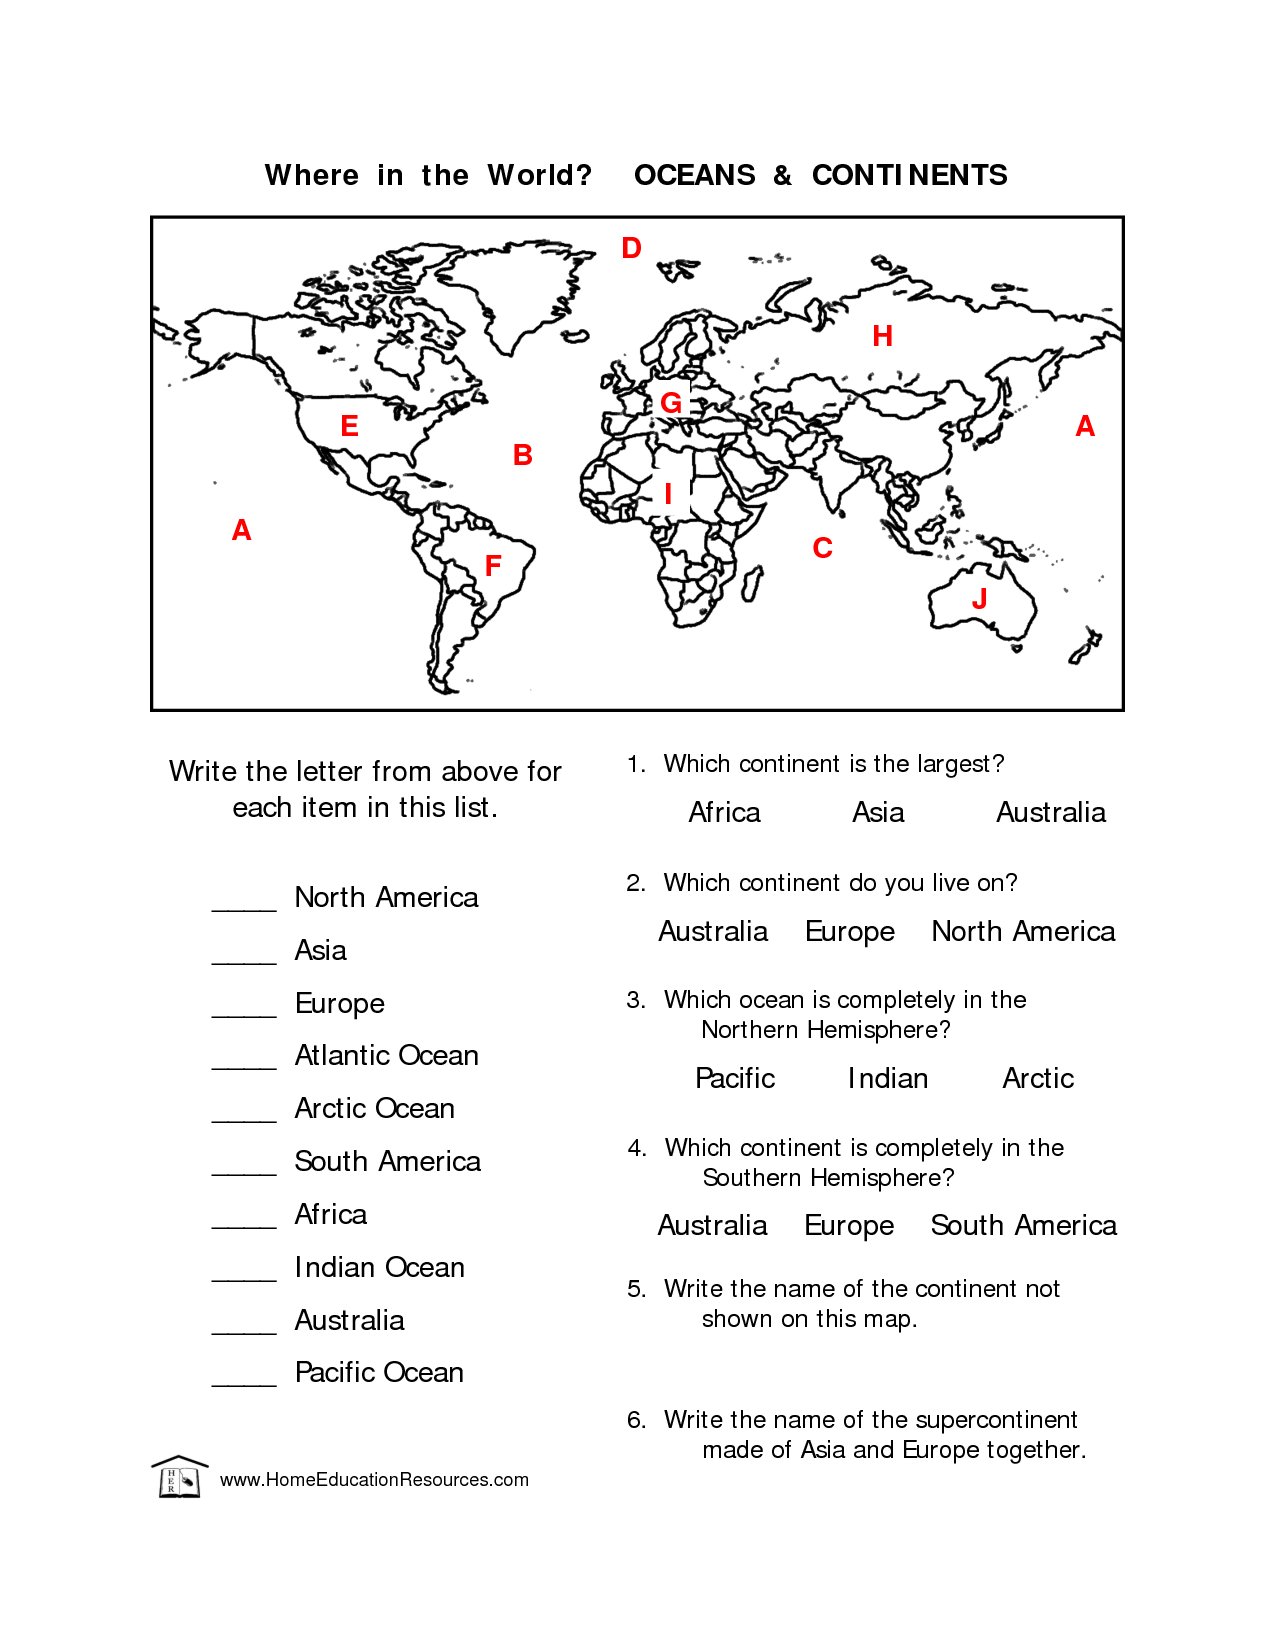 continents-and-oceans-worksheet